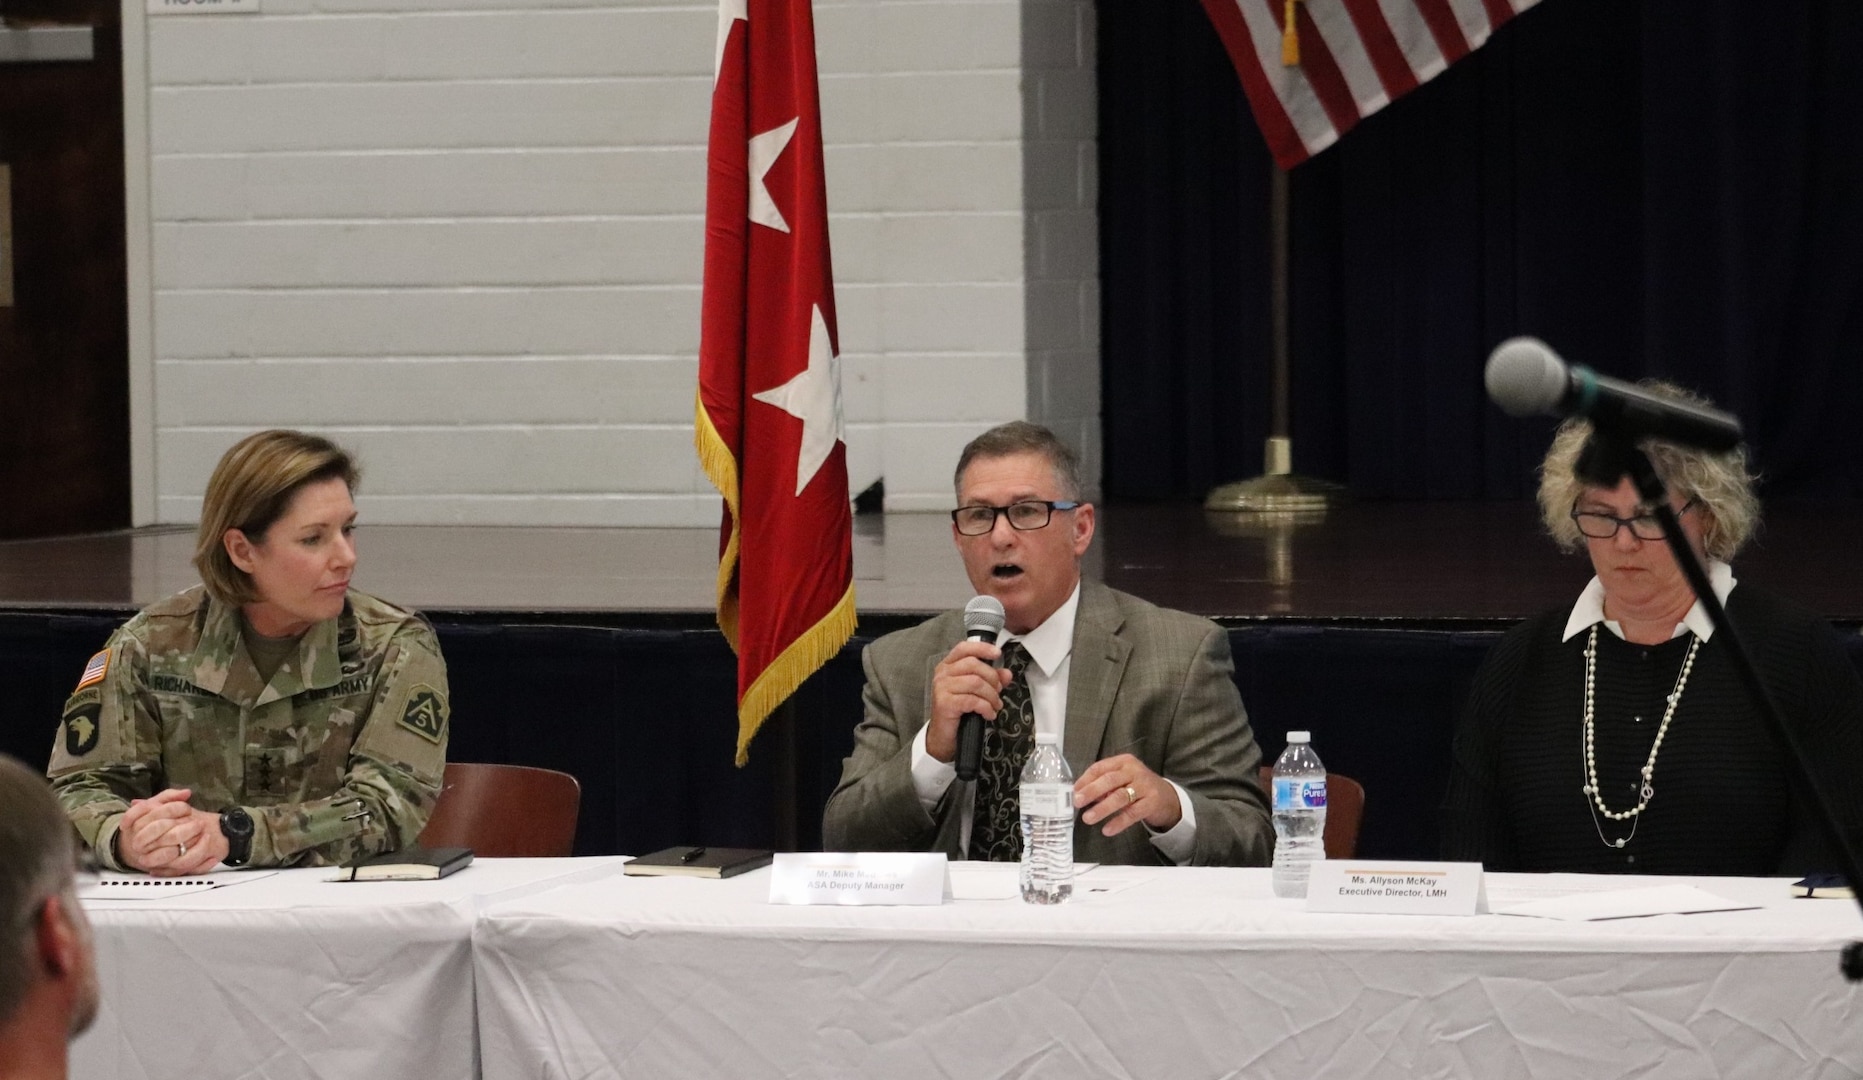 Mike Mathews (center), Army Support Activity deputy manager, updates residents on changes his office has made to provide better oversight of the privatized housing contractor at Joint base San Antonio-Fort Sam Houston during a town hall Sept. 18.